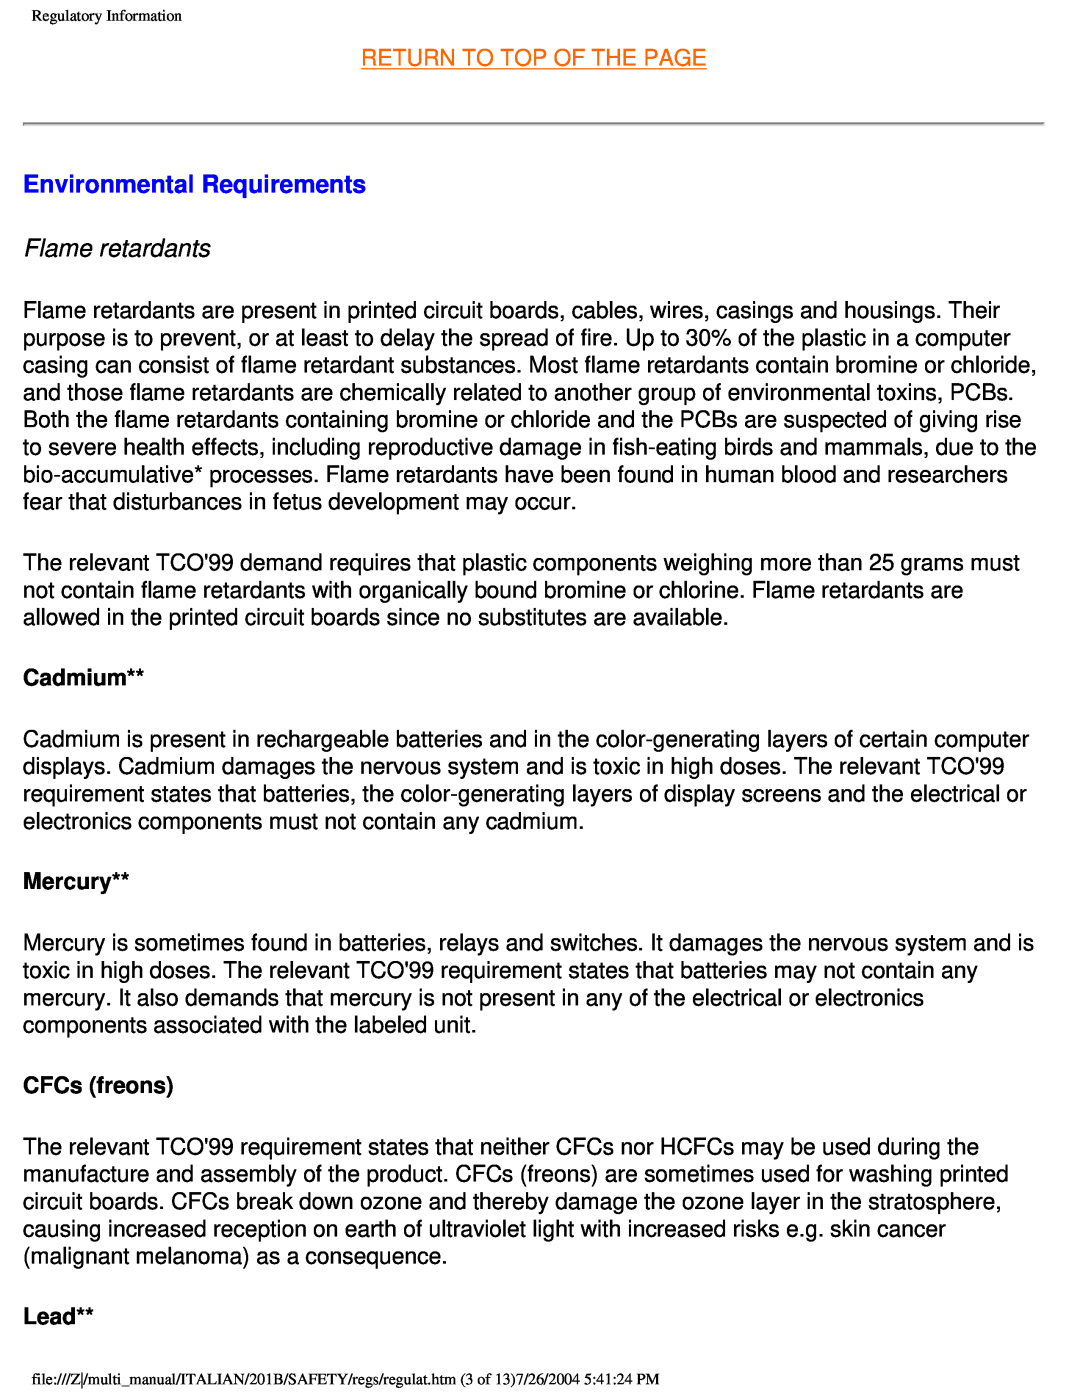 Philips 201B user manual Environmental Requirements, Flame retardants, Return To Top Of The Page 